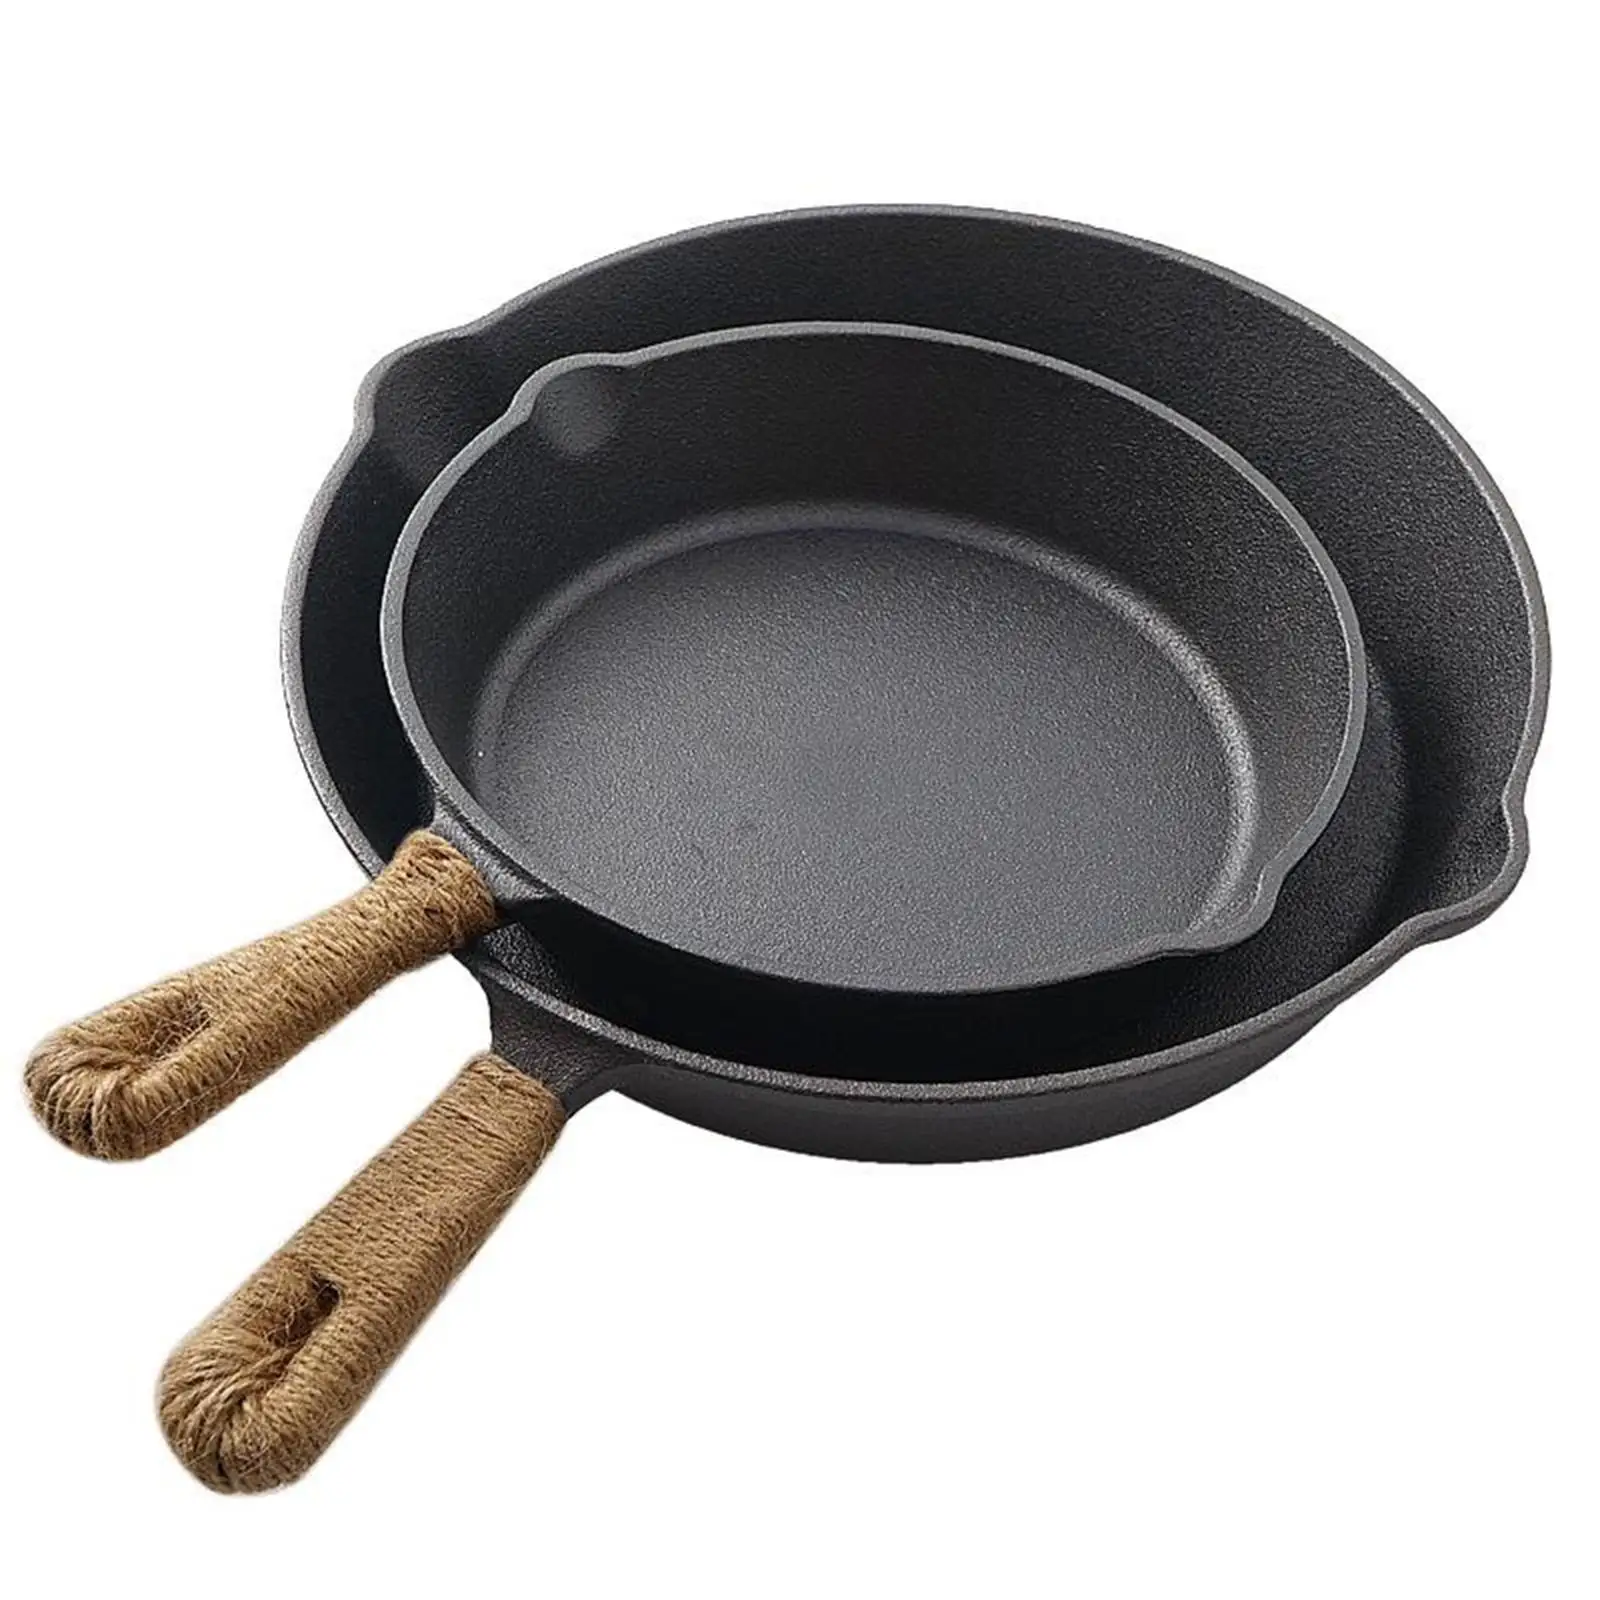 Camping Iron Nonstick Frying Pan - Frying Pan for Oven, Induction, Gas,